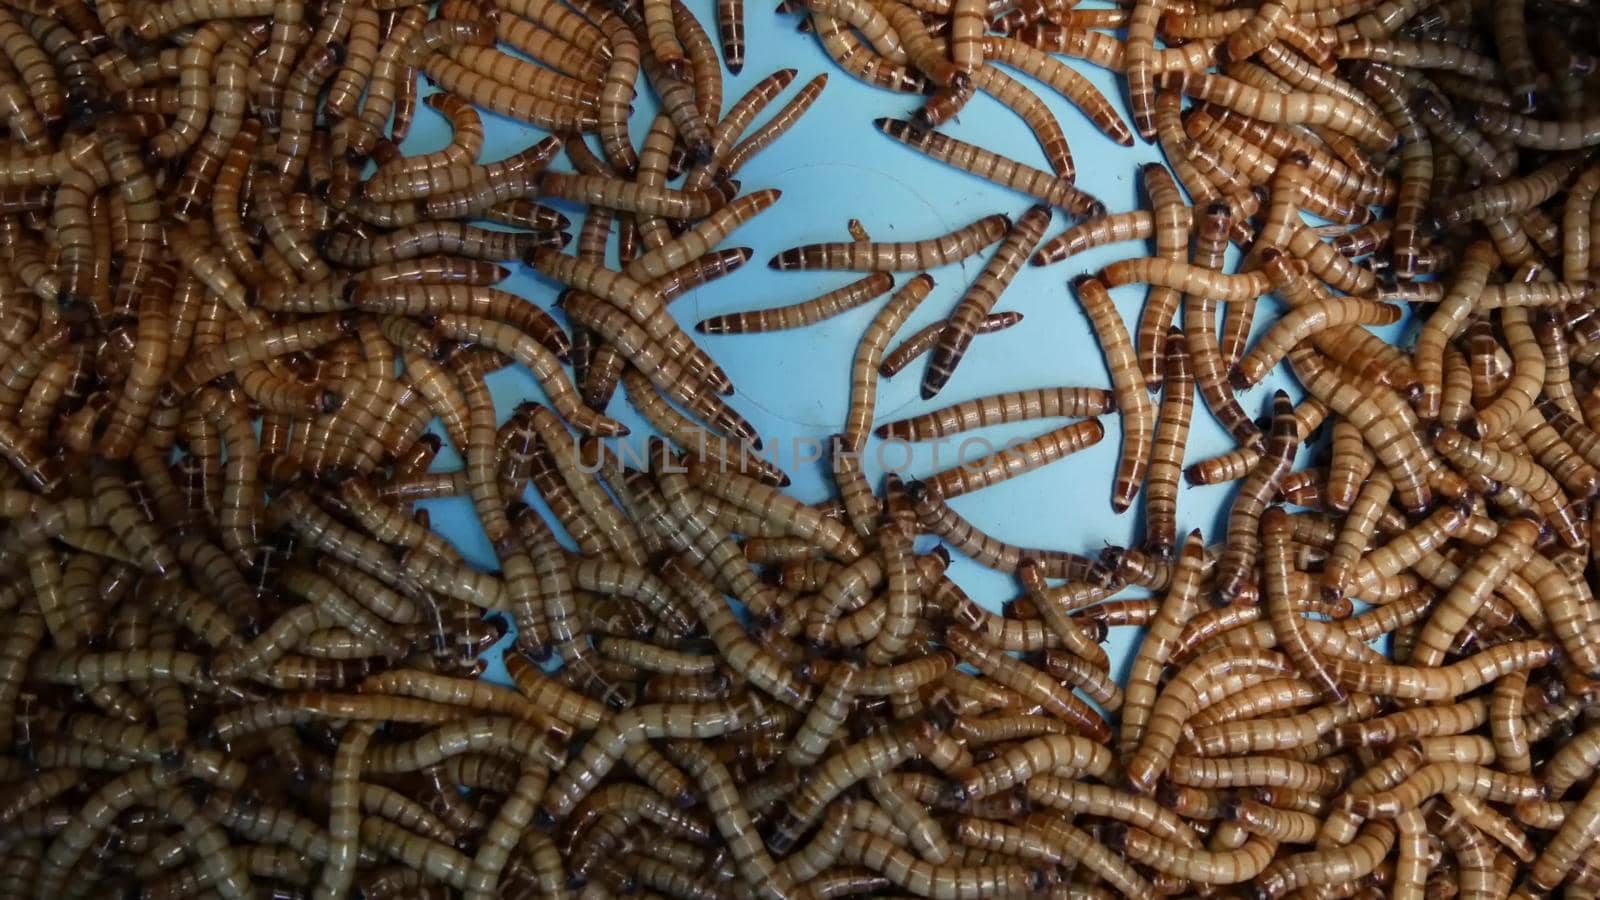 Many beetle larvae crawling in container. Small alive mealworms for food preparation crawling on bottom of container on market.